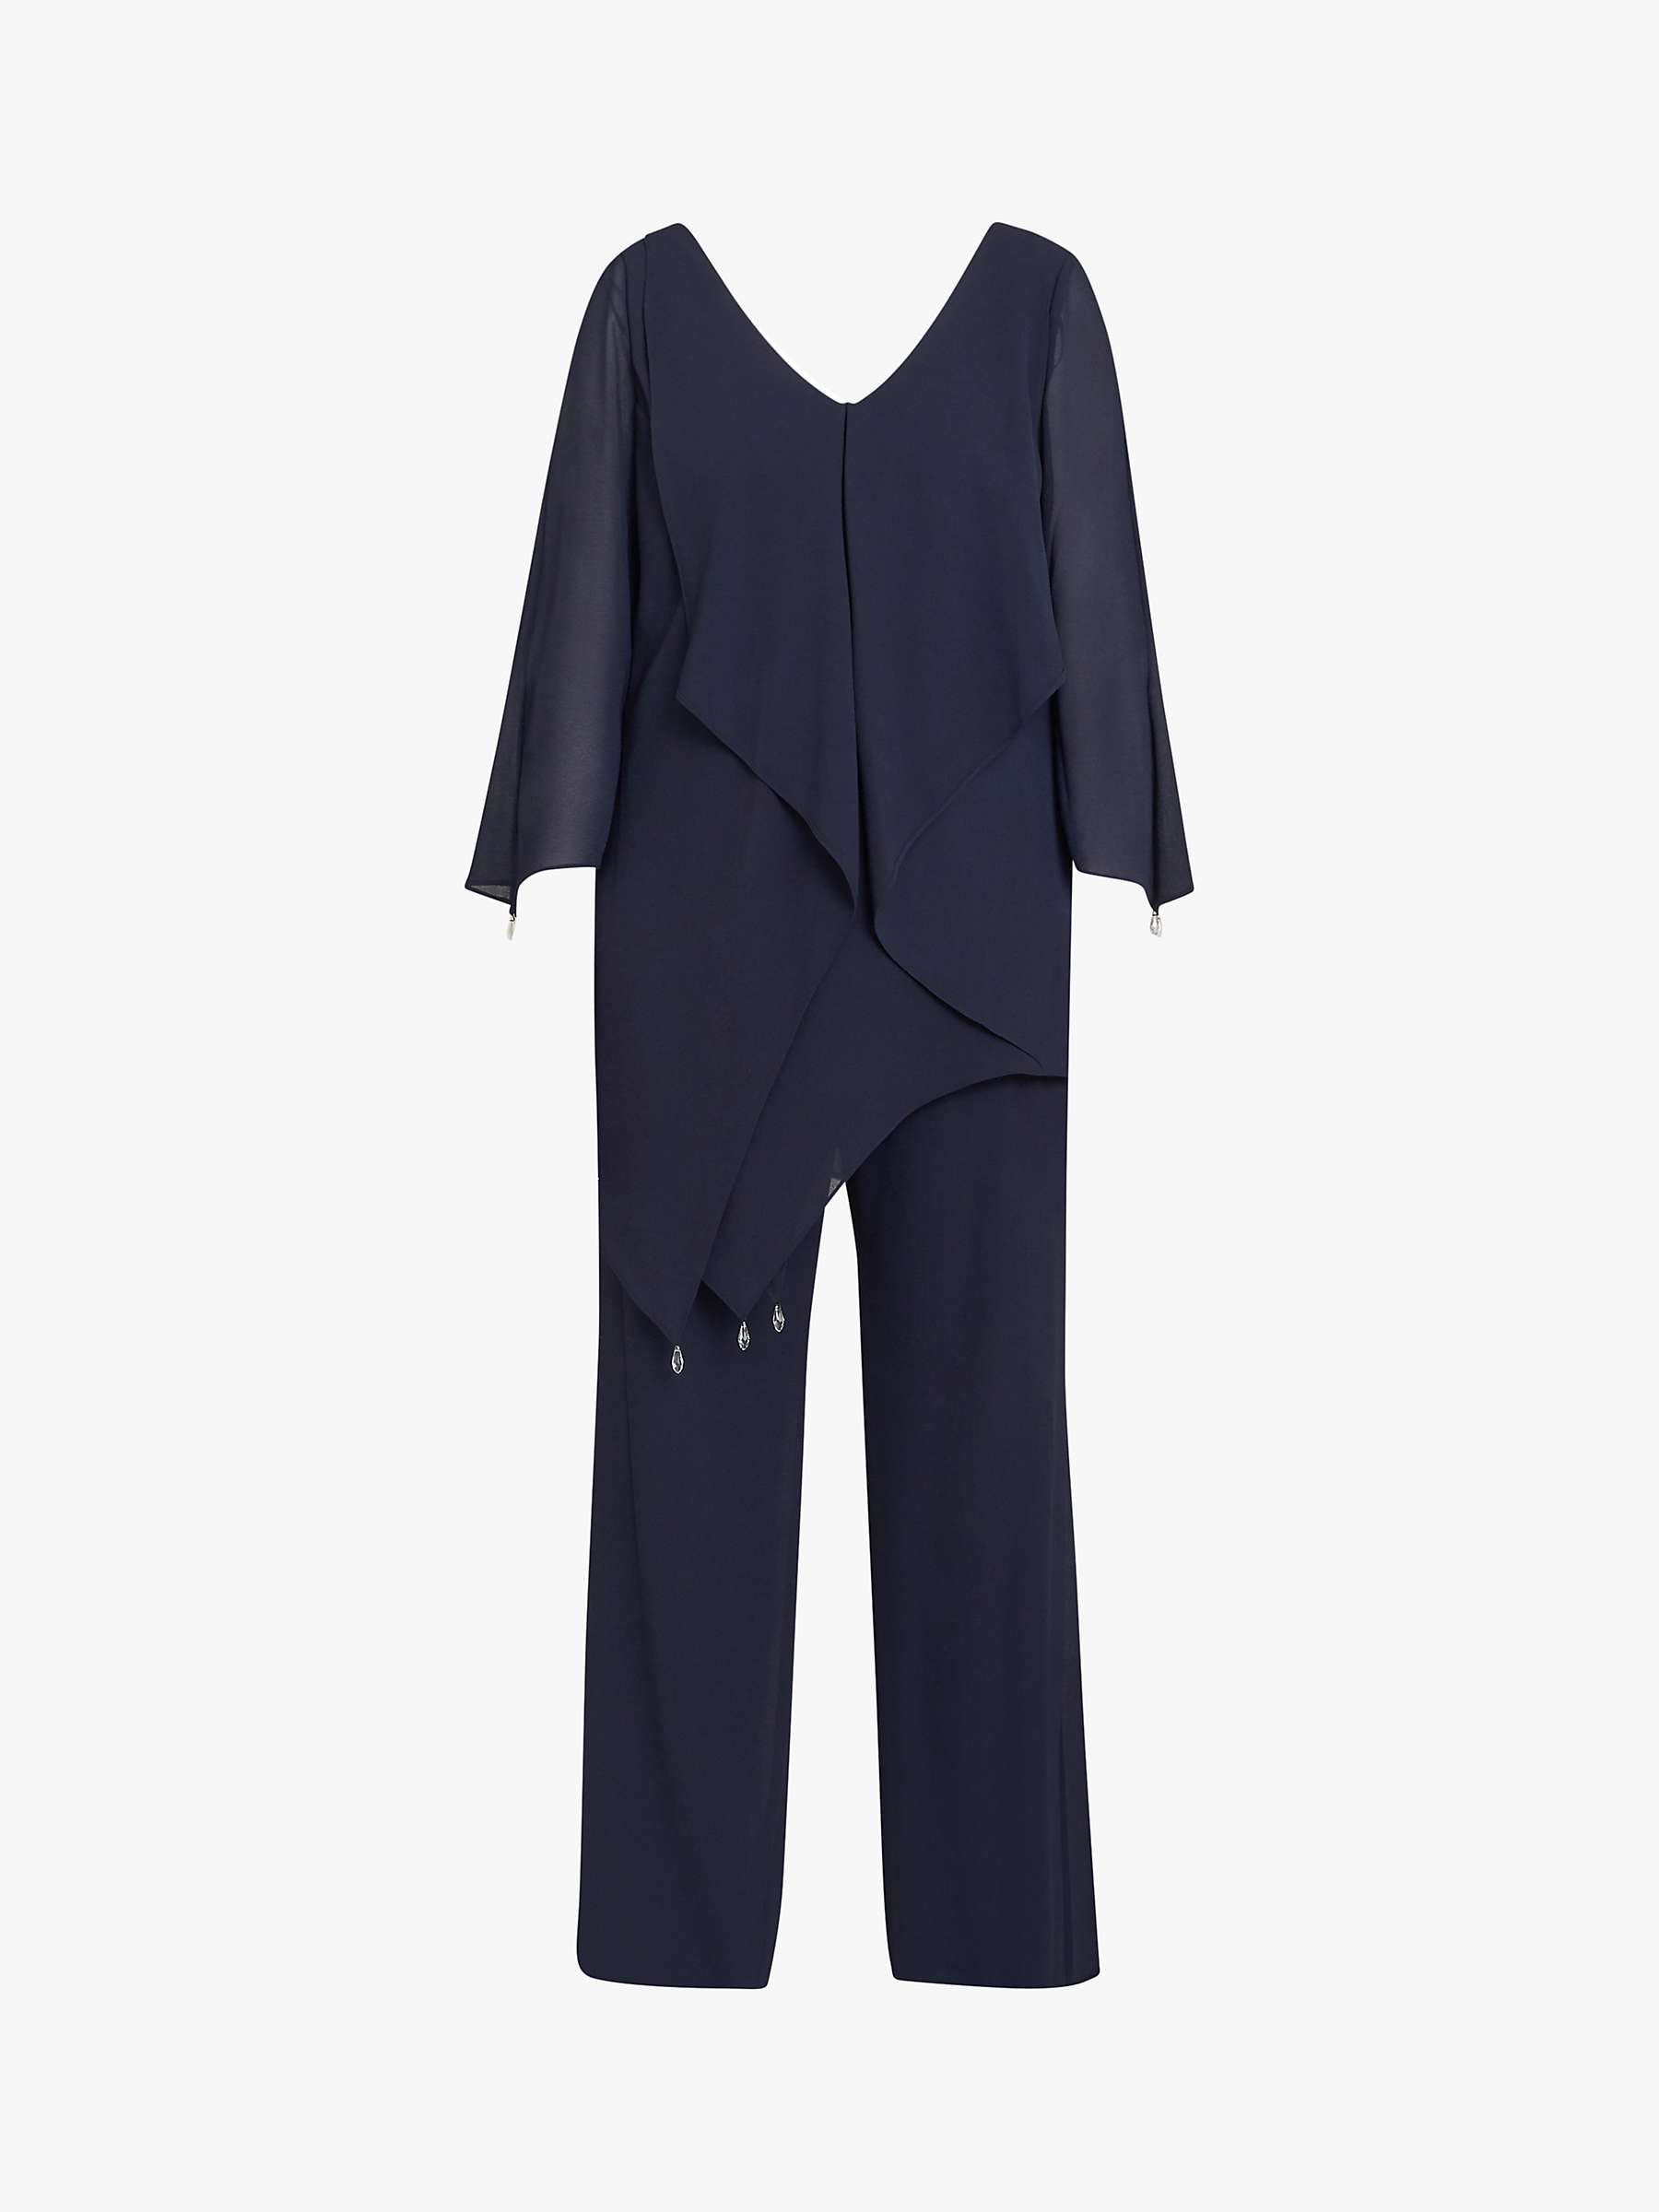 Buy Gina Bacconi Wilma 2-Piece Suit With Asymmetric Cascade Ruffle Blouse & Wide Leg Trousers, Navy Online at johnlewis.com